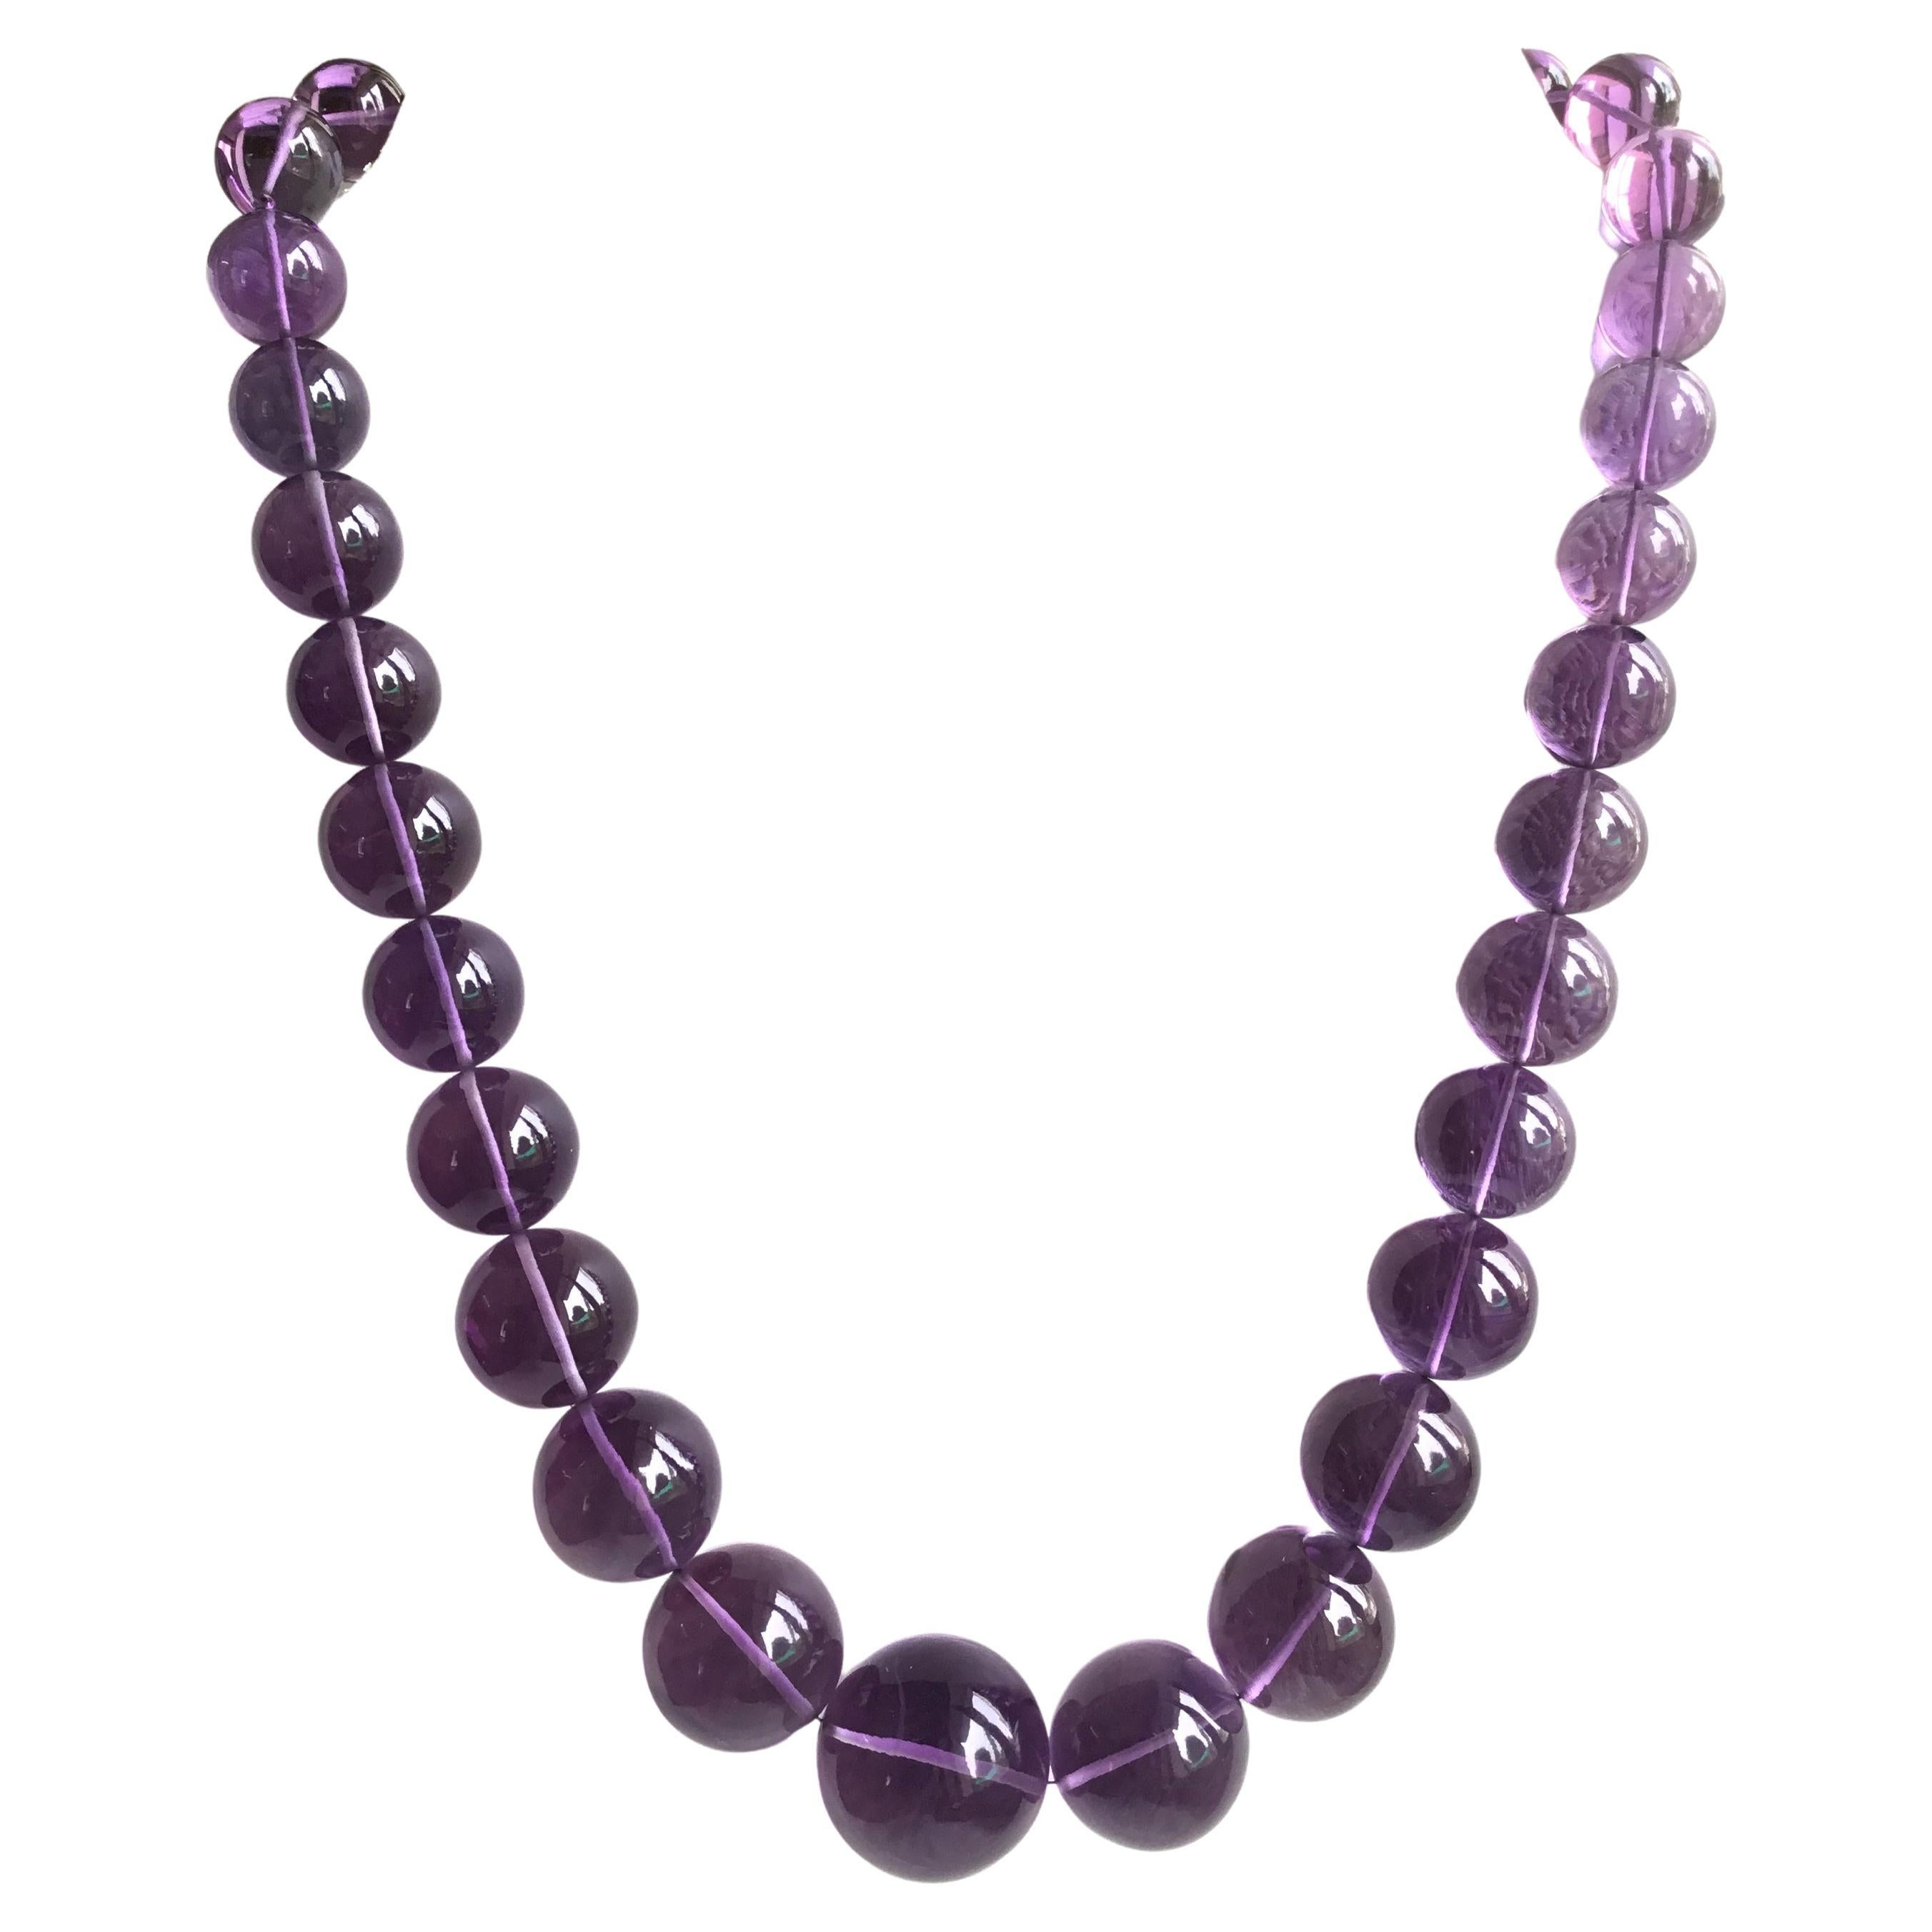 Top Quality Amethyst Balls Necklace Loupe Clean